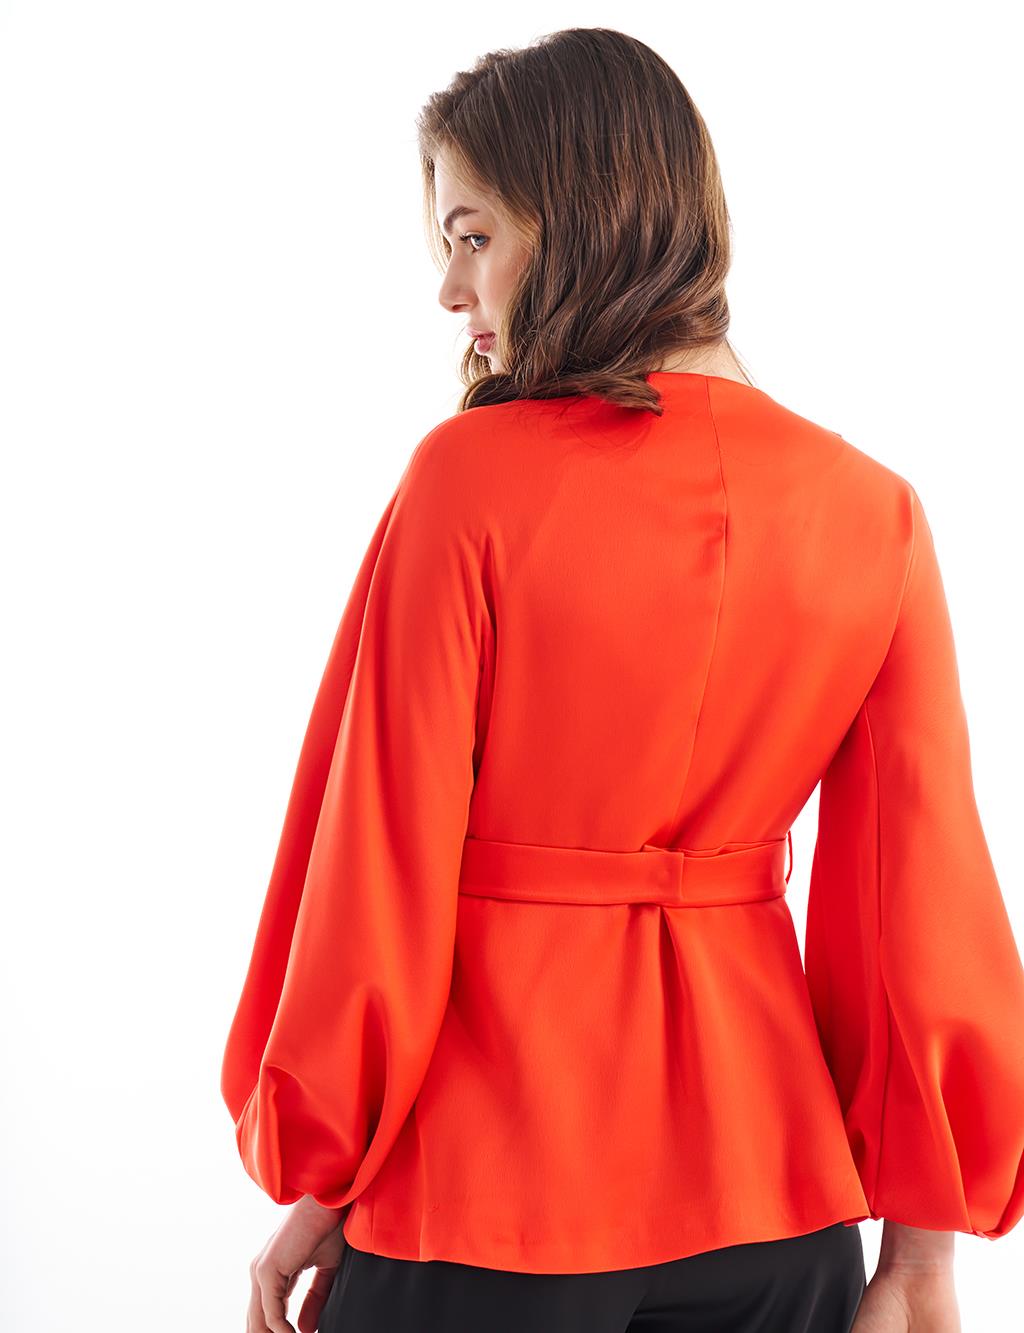 Balloon Sleeve Jacket Coral with Metal Accessories